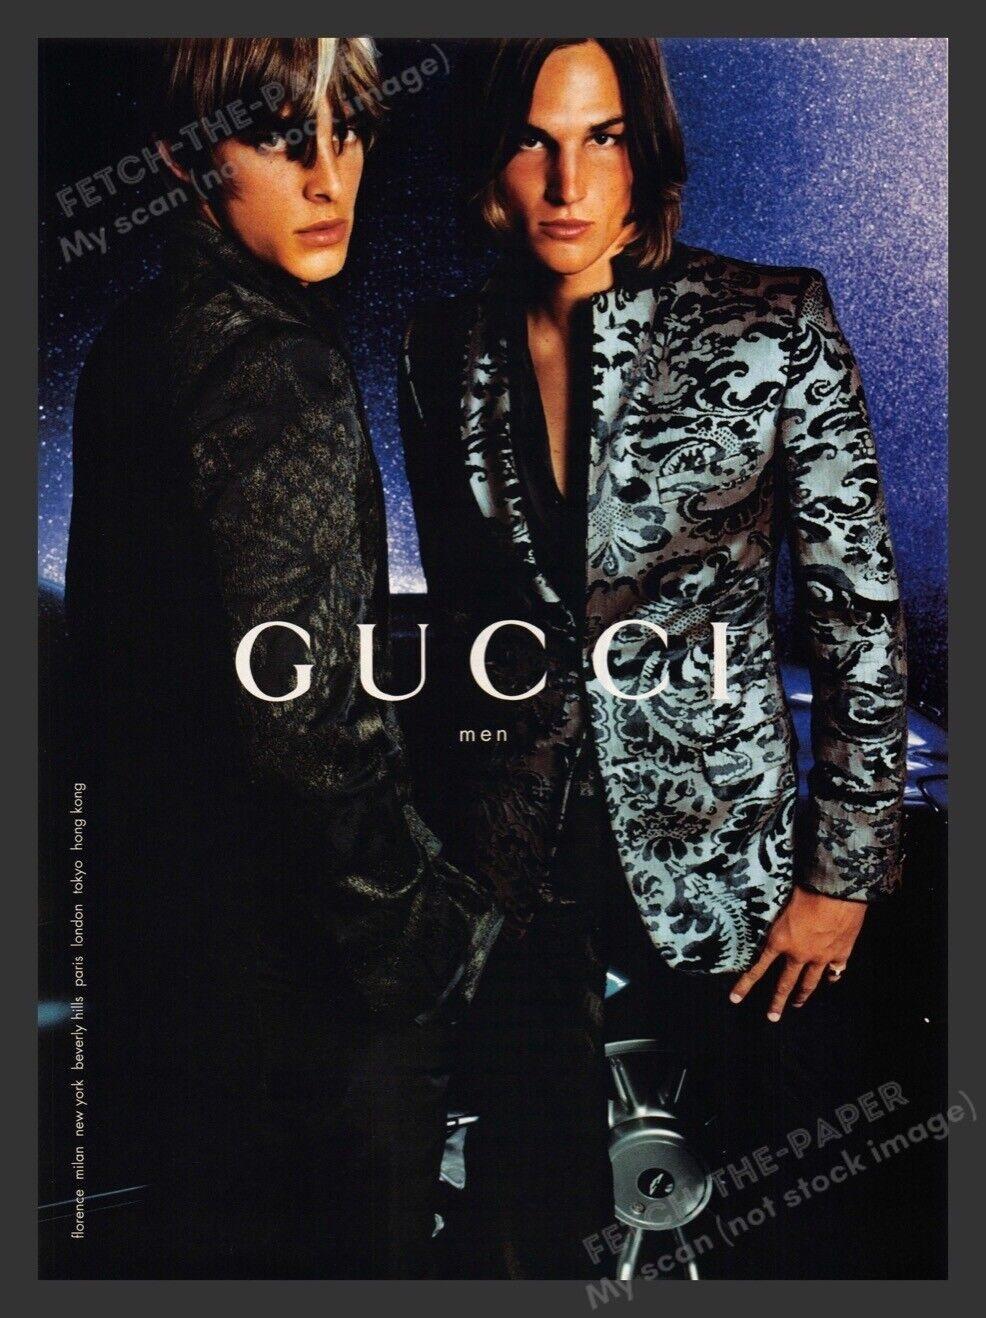 Tom Ford for Gucci Velvet Painted Men's Blazer Jacket
S/S 2000 Runway and Campaign
Italian size - 48 R
Black Gothic Design Damask Velvet with Iridescent Paint. 
Under the different light and angle paint looks from gray to blue and pink. 
Notched